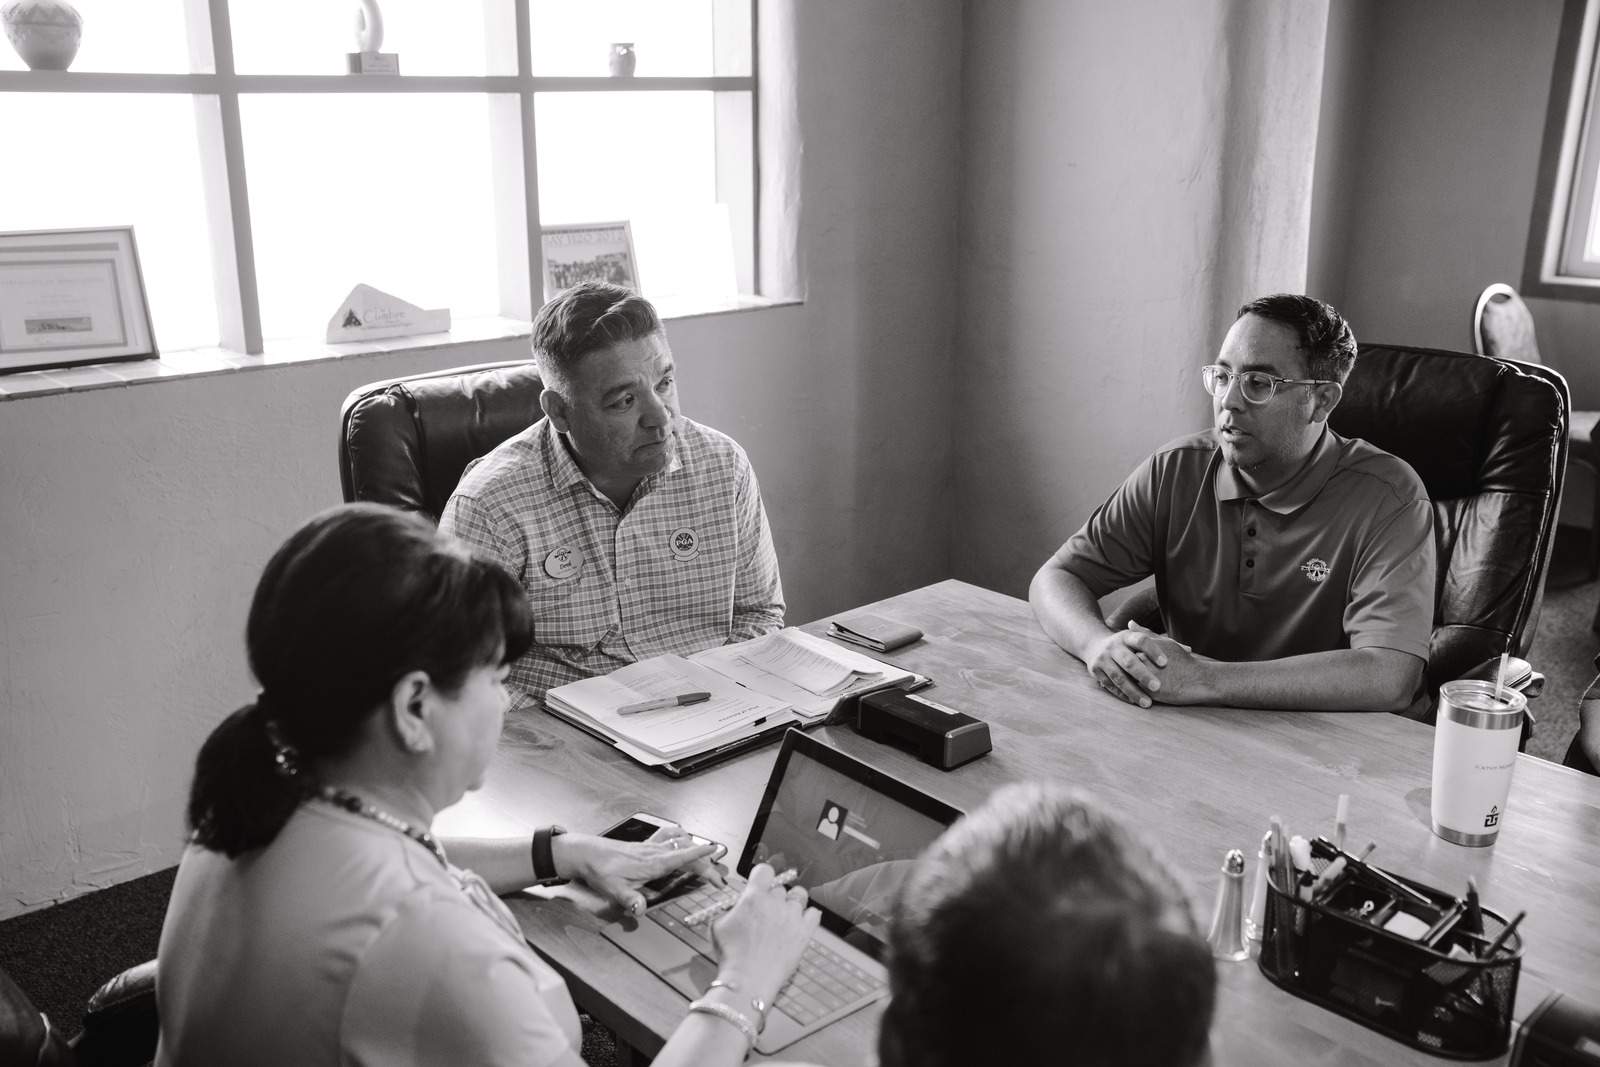 Canva – Grayscale Photo of People Inside A Room Having A Meeting